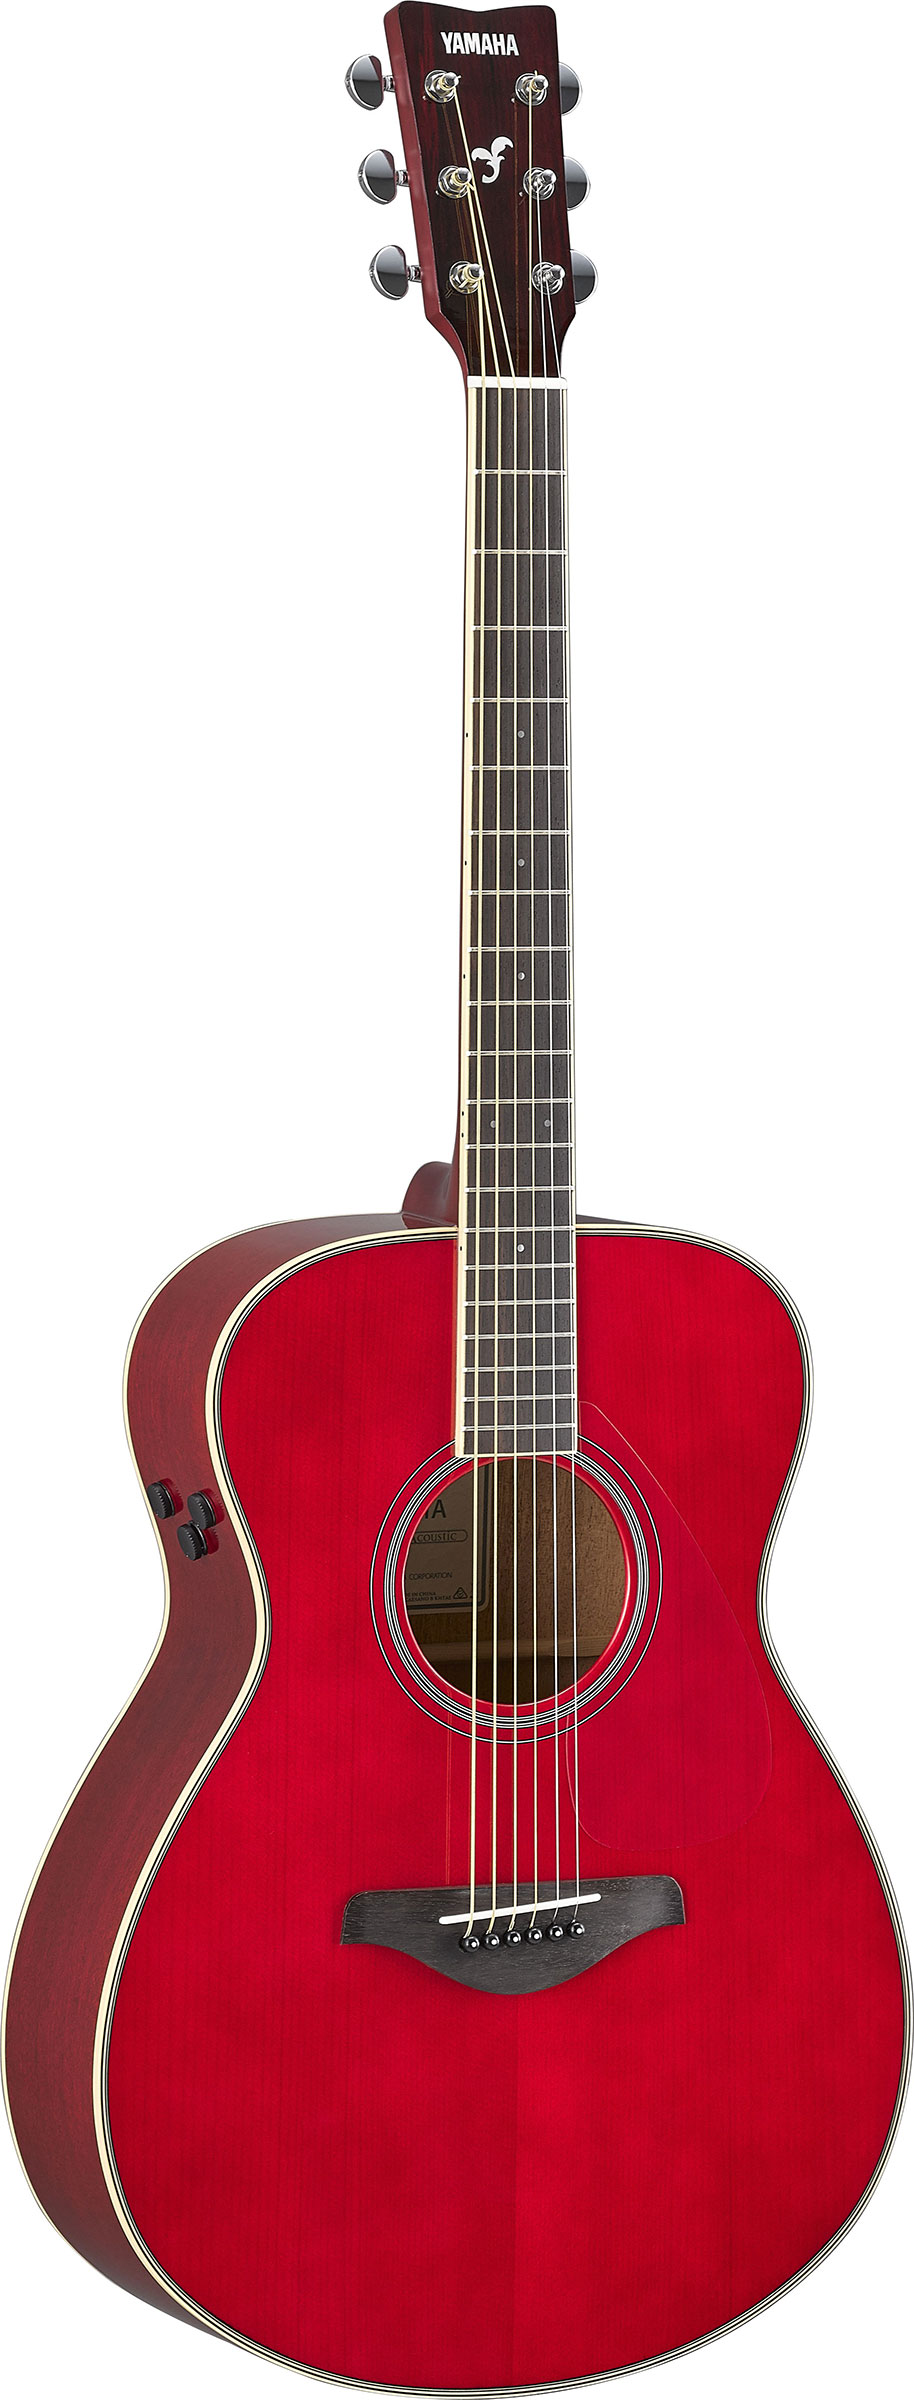 An image of Yamaha FS-TA TransAcoustic Guitar Red | PMT Online